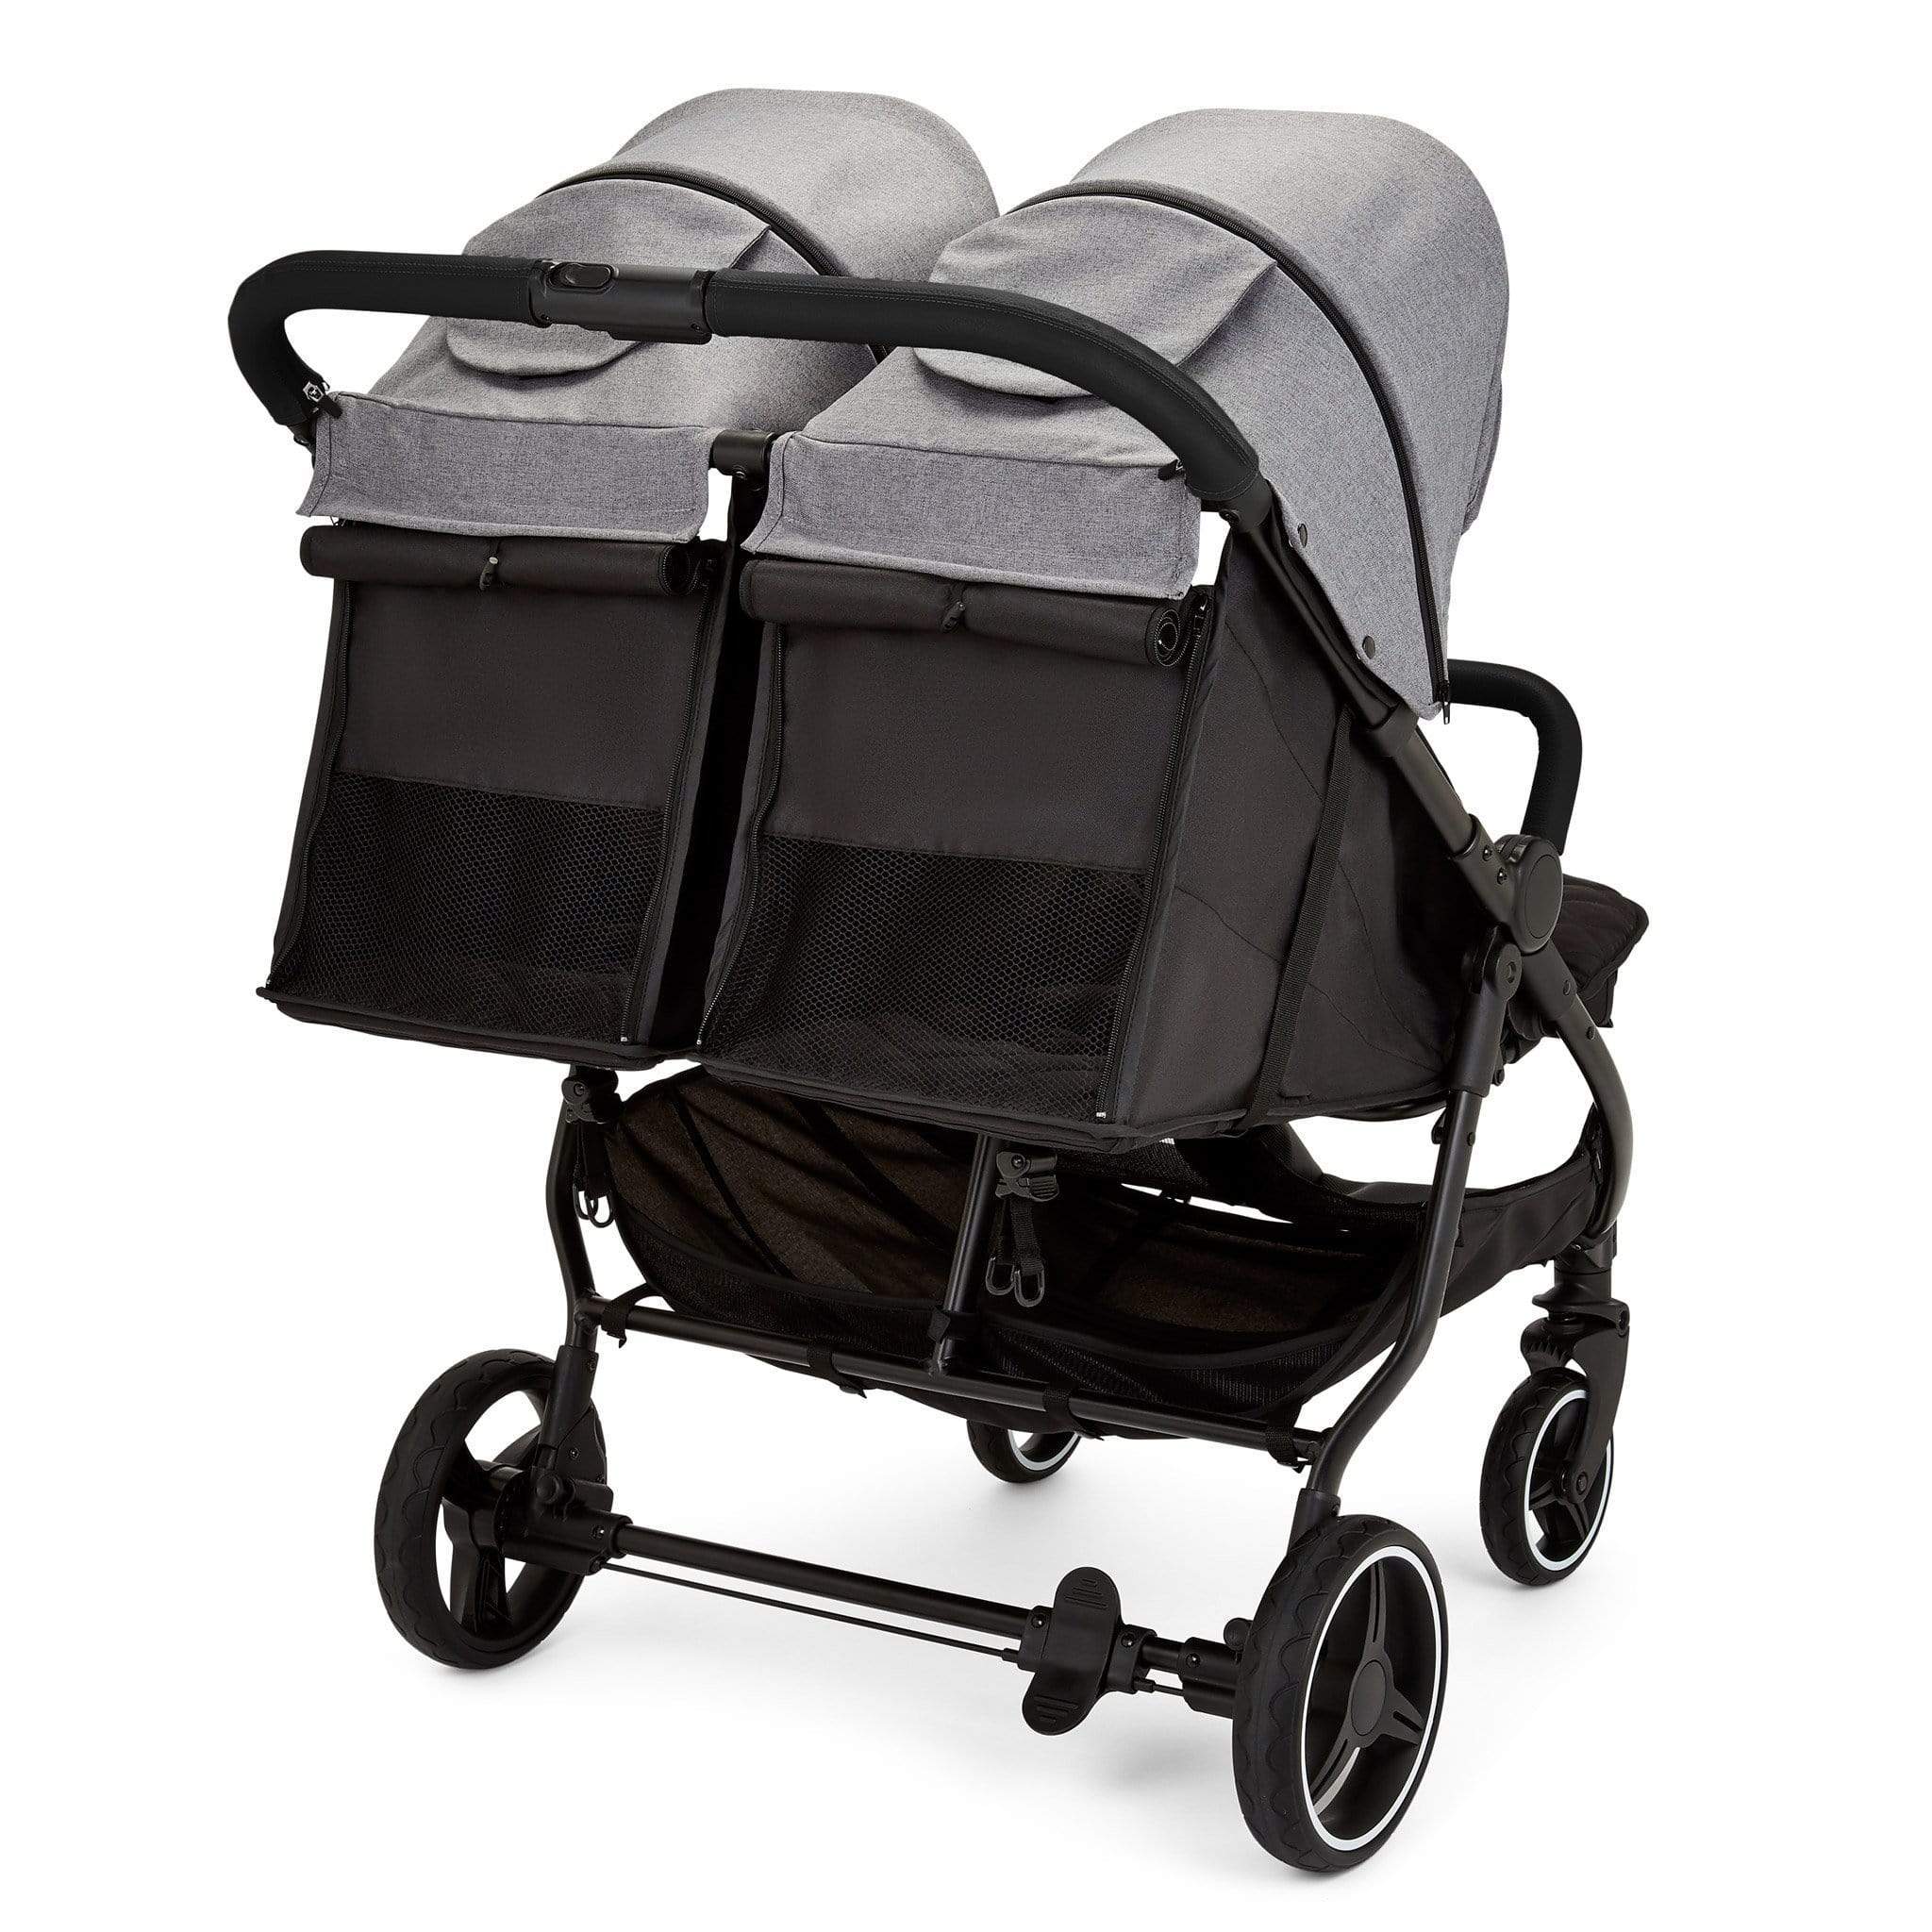 Ickle Bubba double buggies Ickle Bubba Venus Prime Double Stroller Black/Space Grey/Black 16-004-300-014